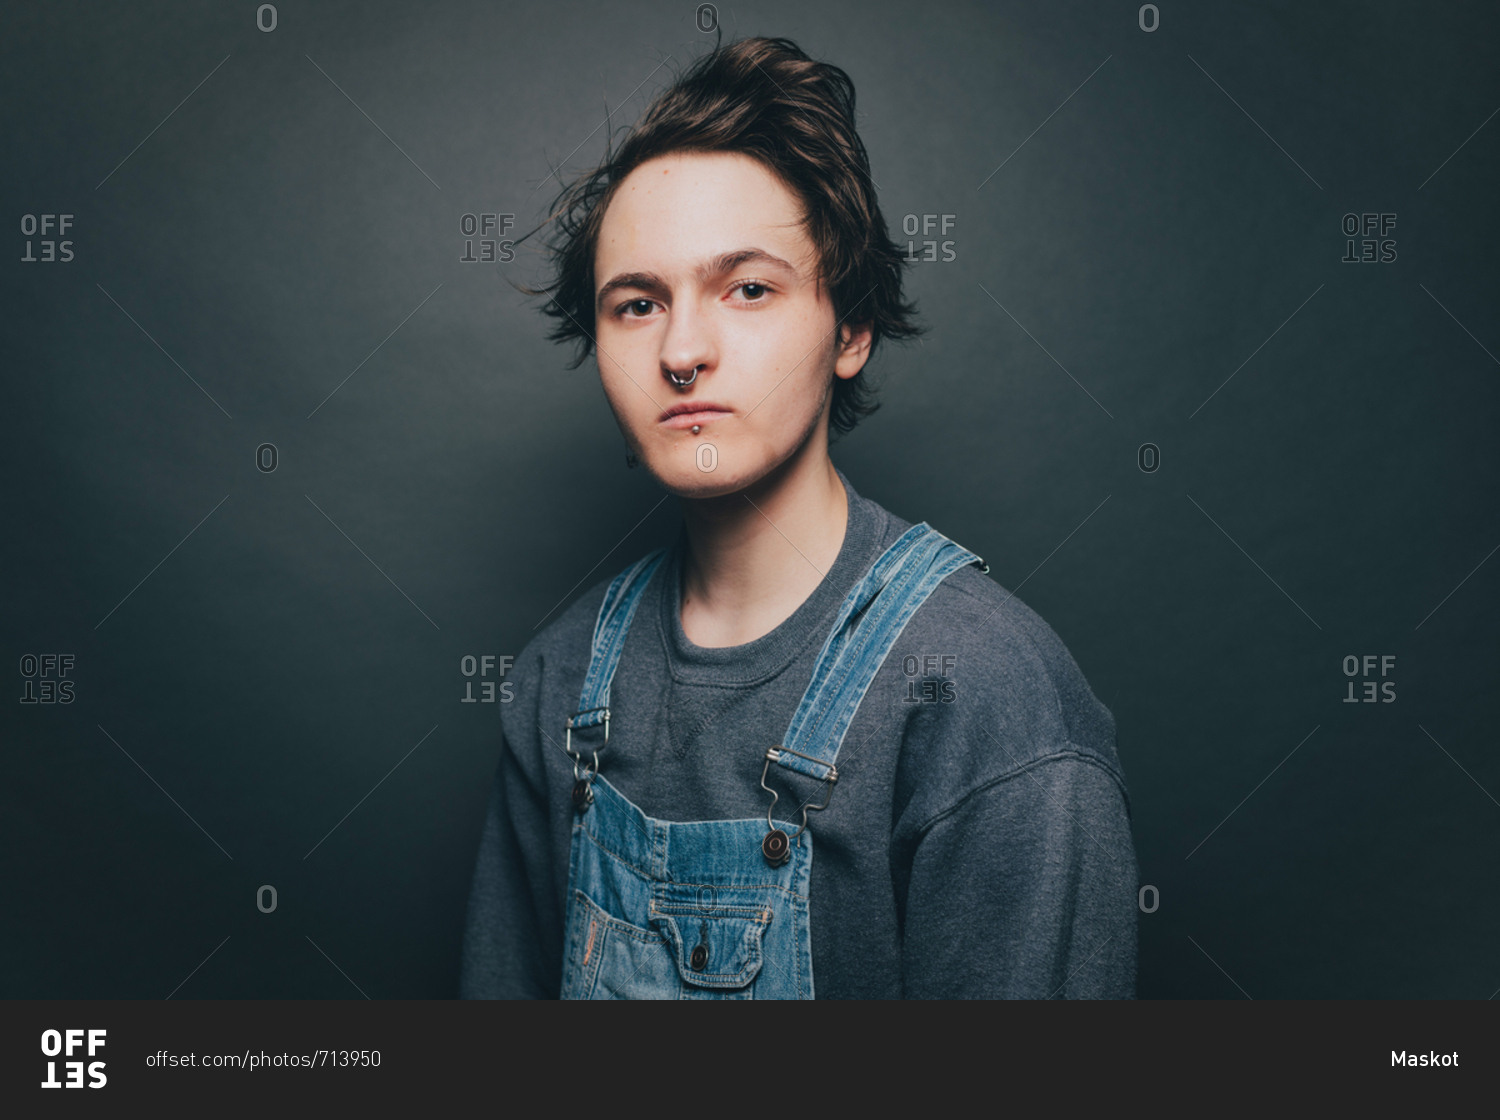 Portrait of trendy young man wearing bib overalls over colored background